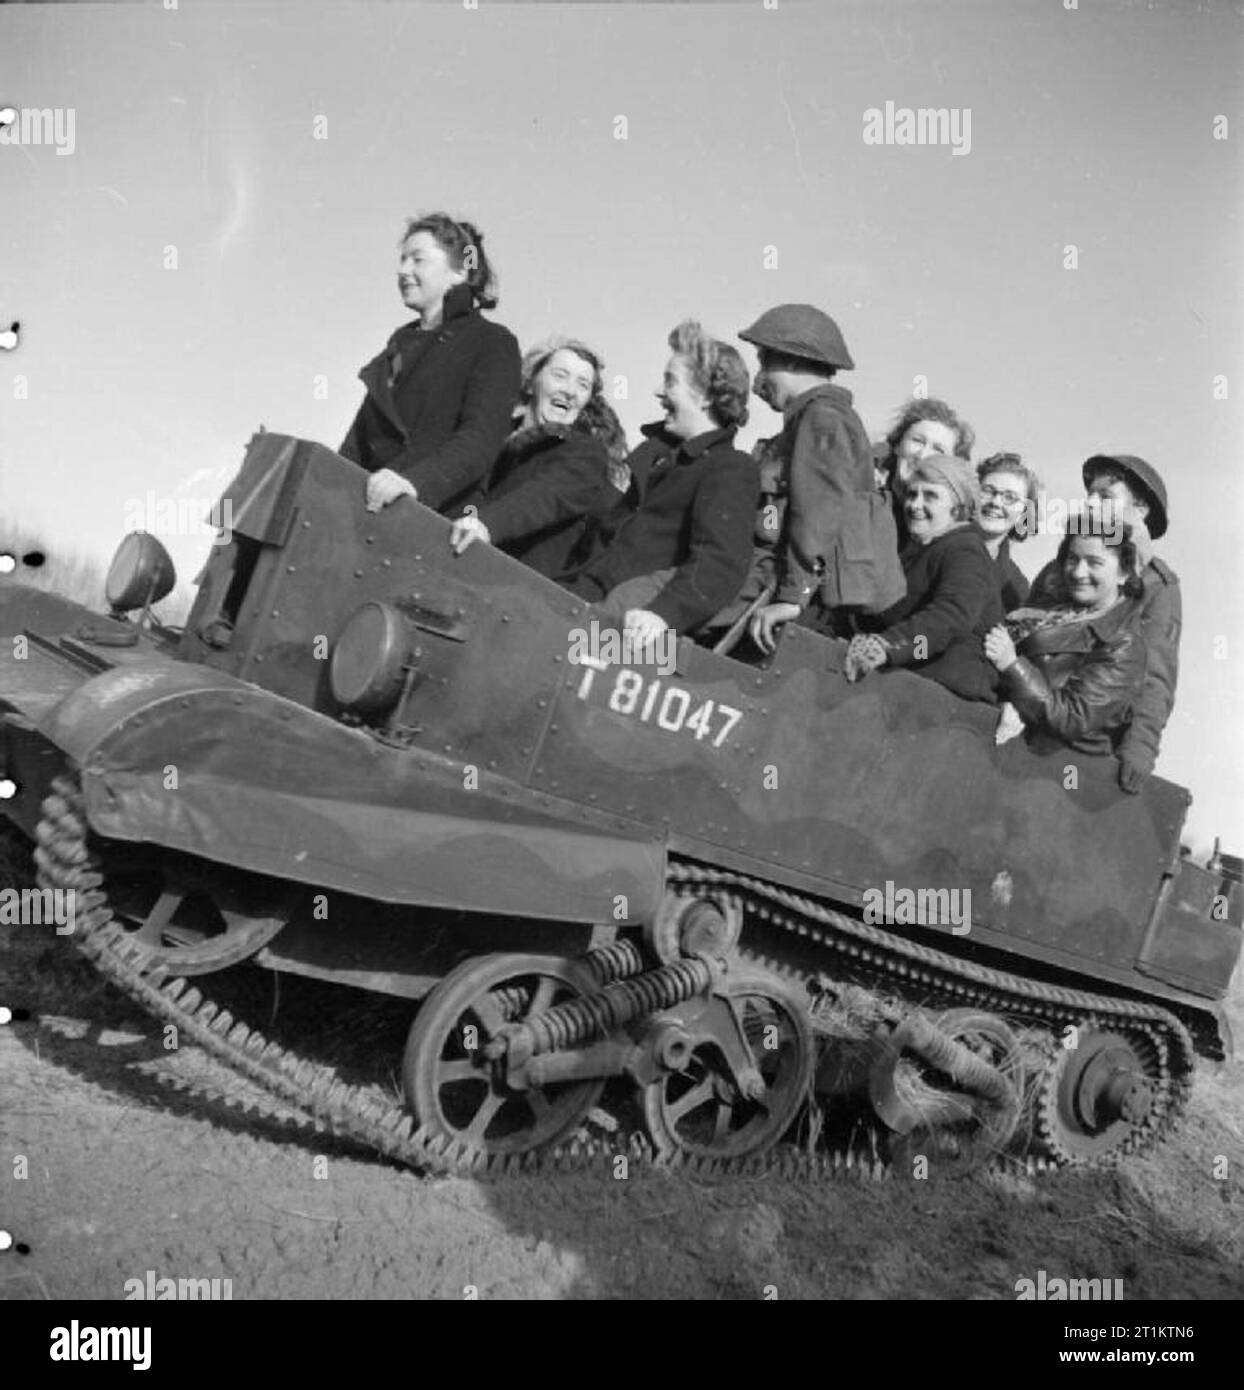 Under Fire - As a Reward- Mortar Bomb Production and Testing at J and F Pool's No 1 Works, Hayle, Cornwall, England, 1943 Women war workers from J & F Pool Ltd, a small West Country arms factory, travel to a test range in a Universal carrier, Mark I. They have been rewarded by the Ministry of Supply for producing 1 million mortar bombs with a trip to see some of their handiwork in action. Stock Photo